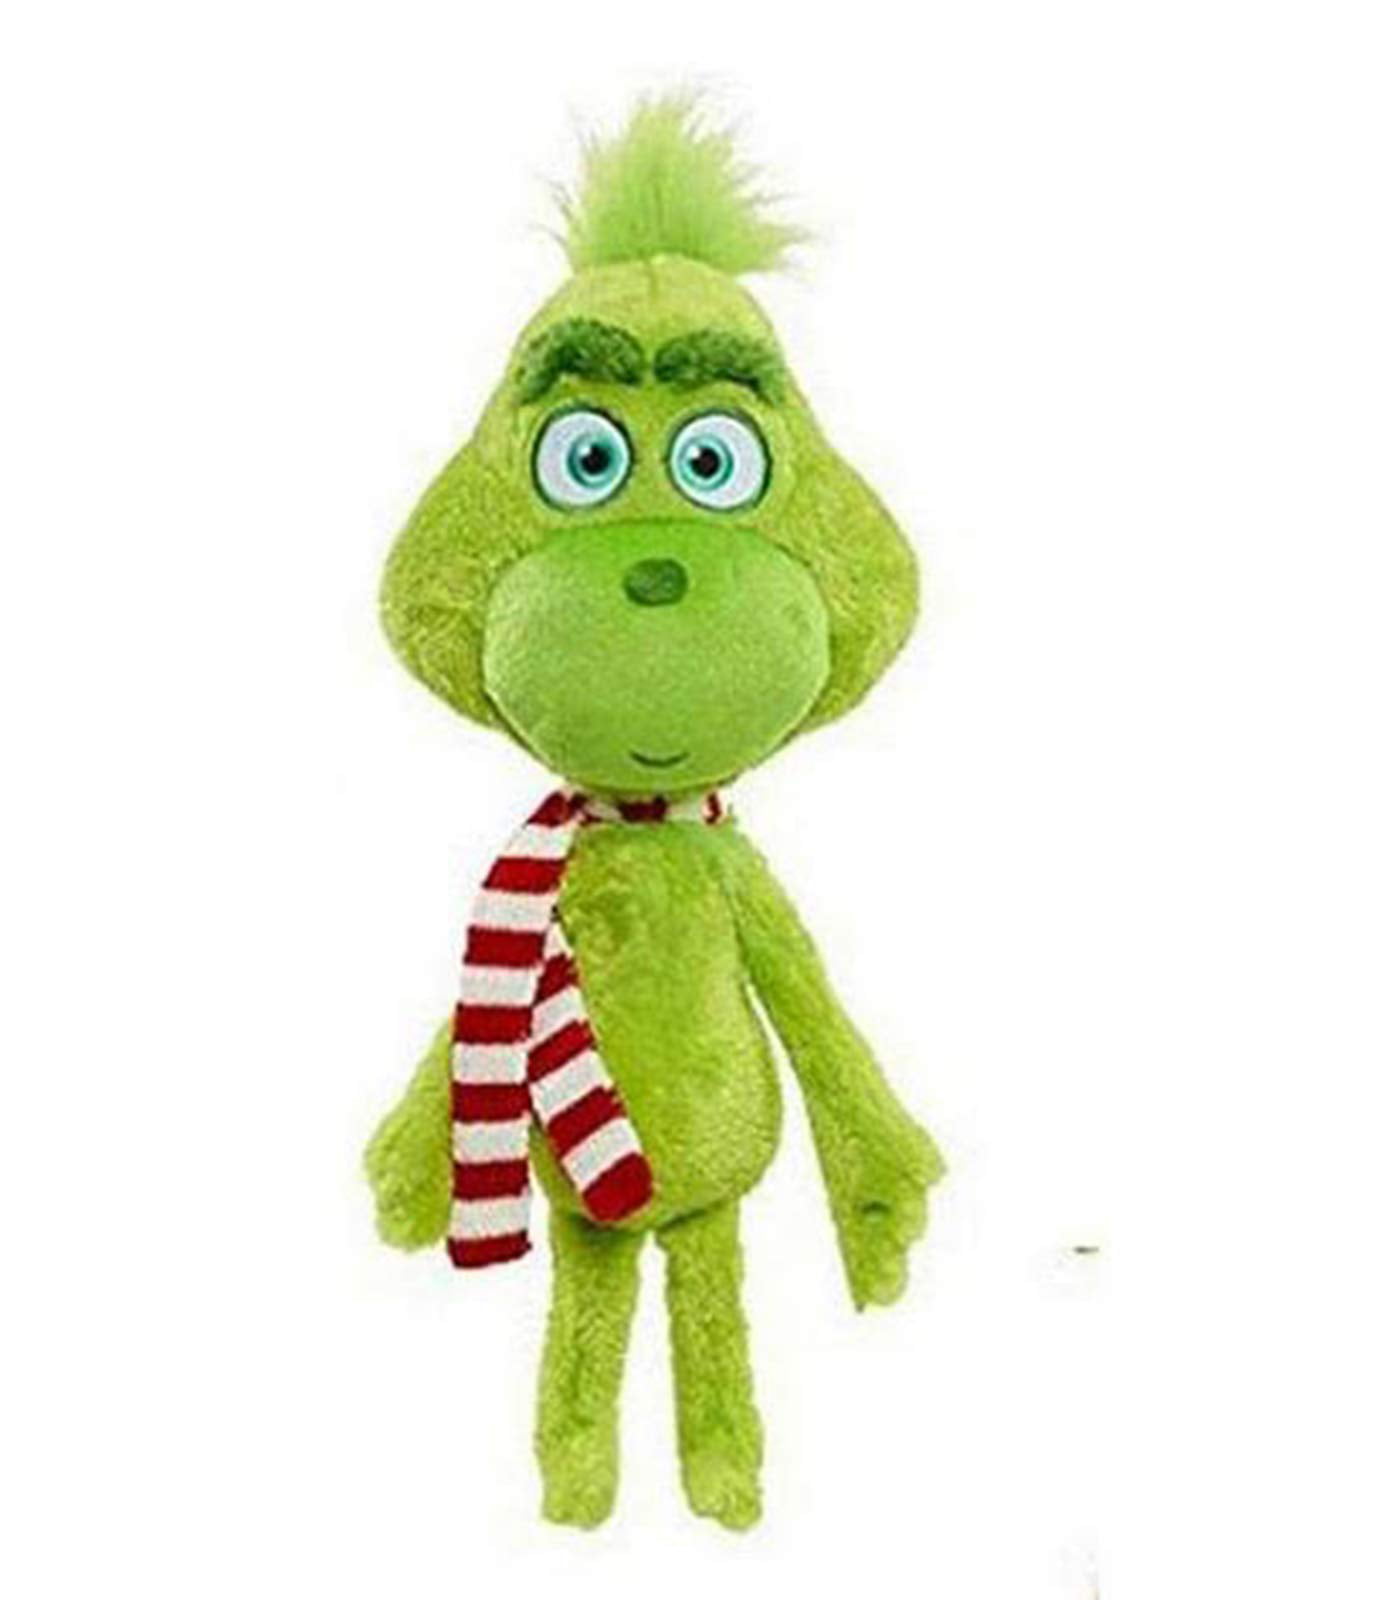 The Grinch Plush Toy Fun Novelty Collectible Stuffed Animal Steal Christmas 18'' 